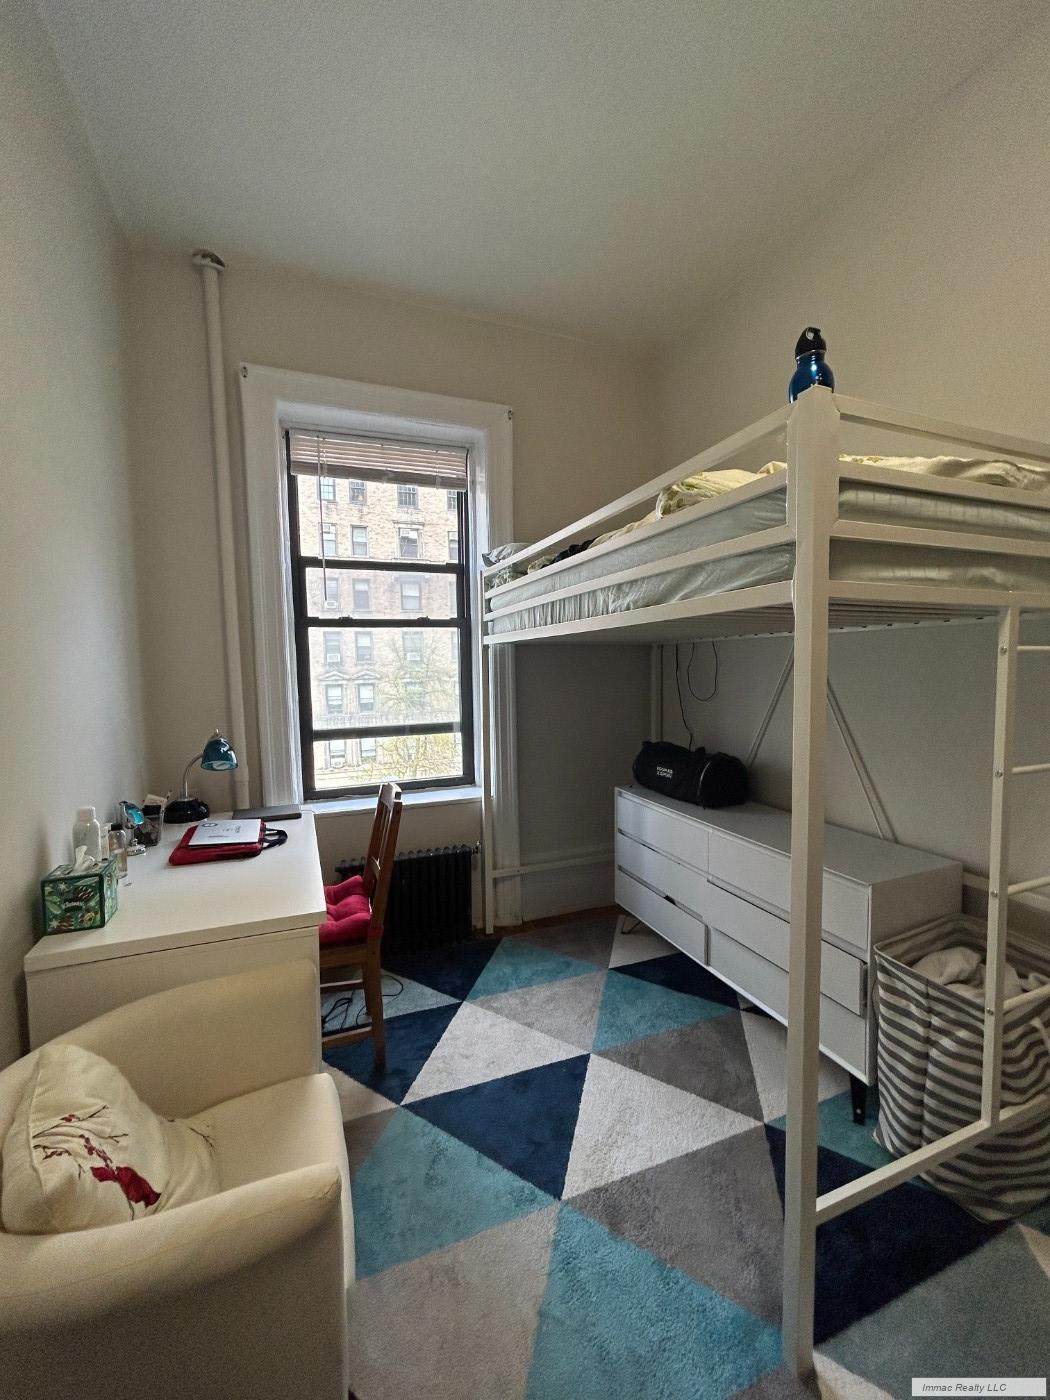 318 West 106th Street 4Fw, Upper West Side, Upper West Side, NYC - 1 Bathrooms  
1 Rooms - 